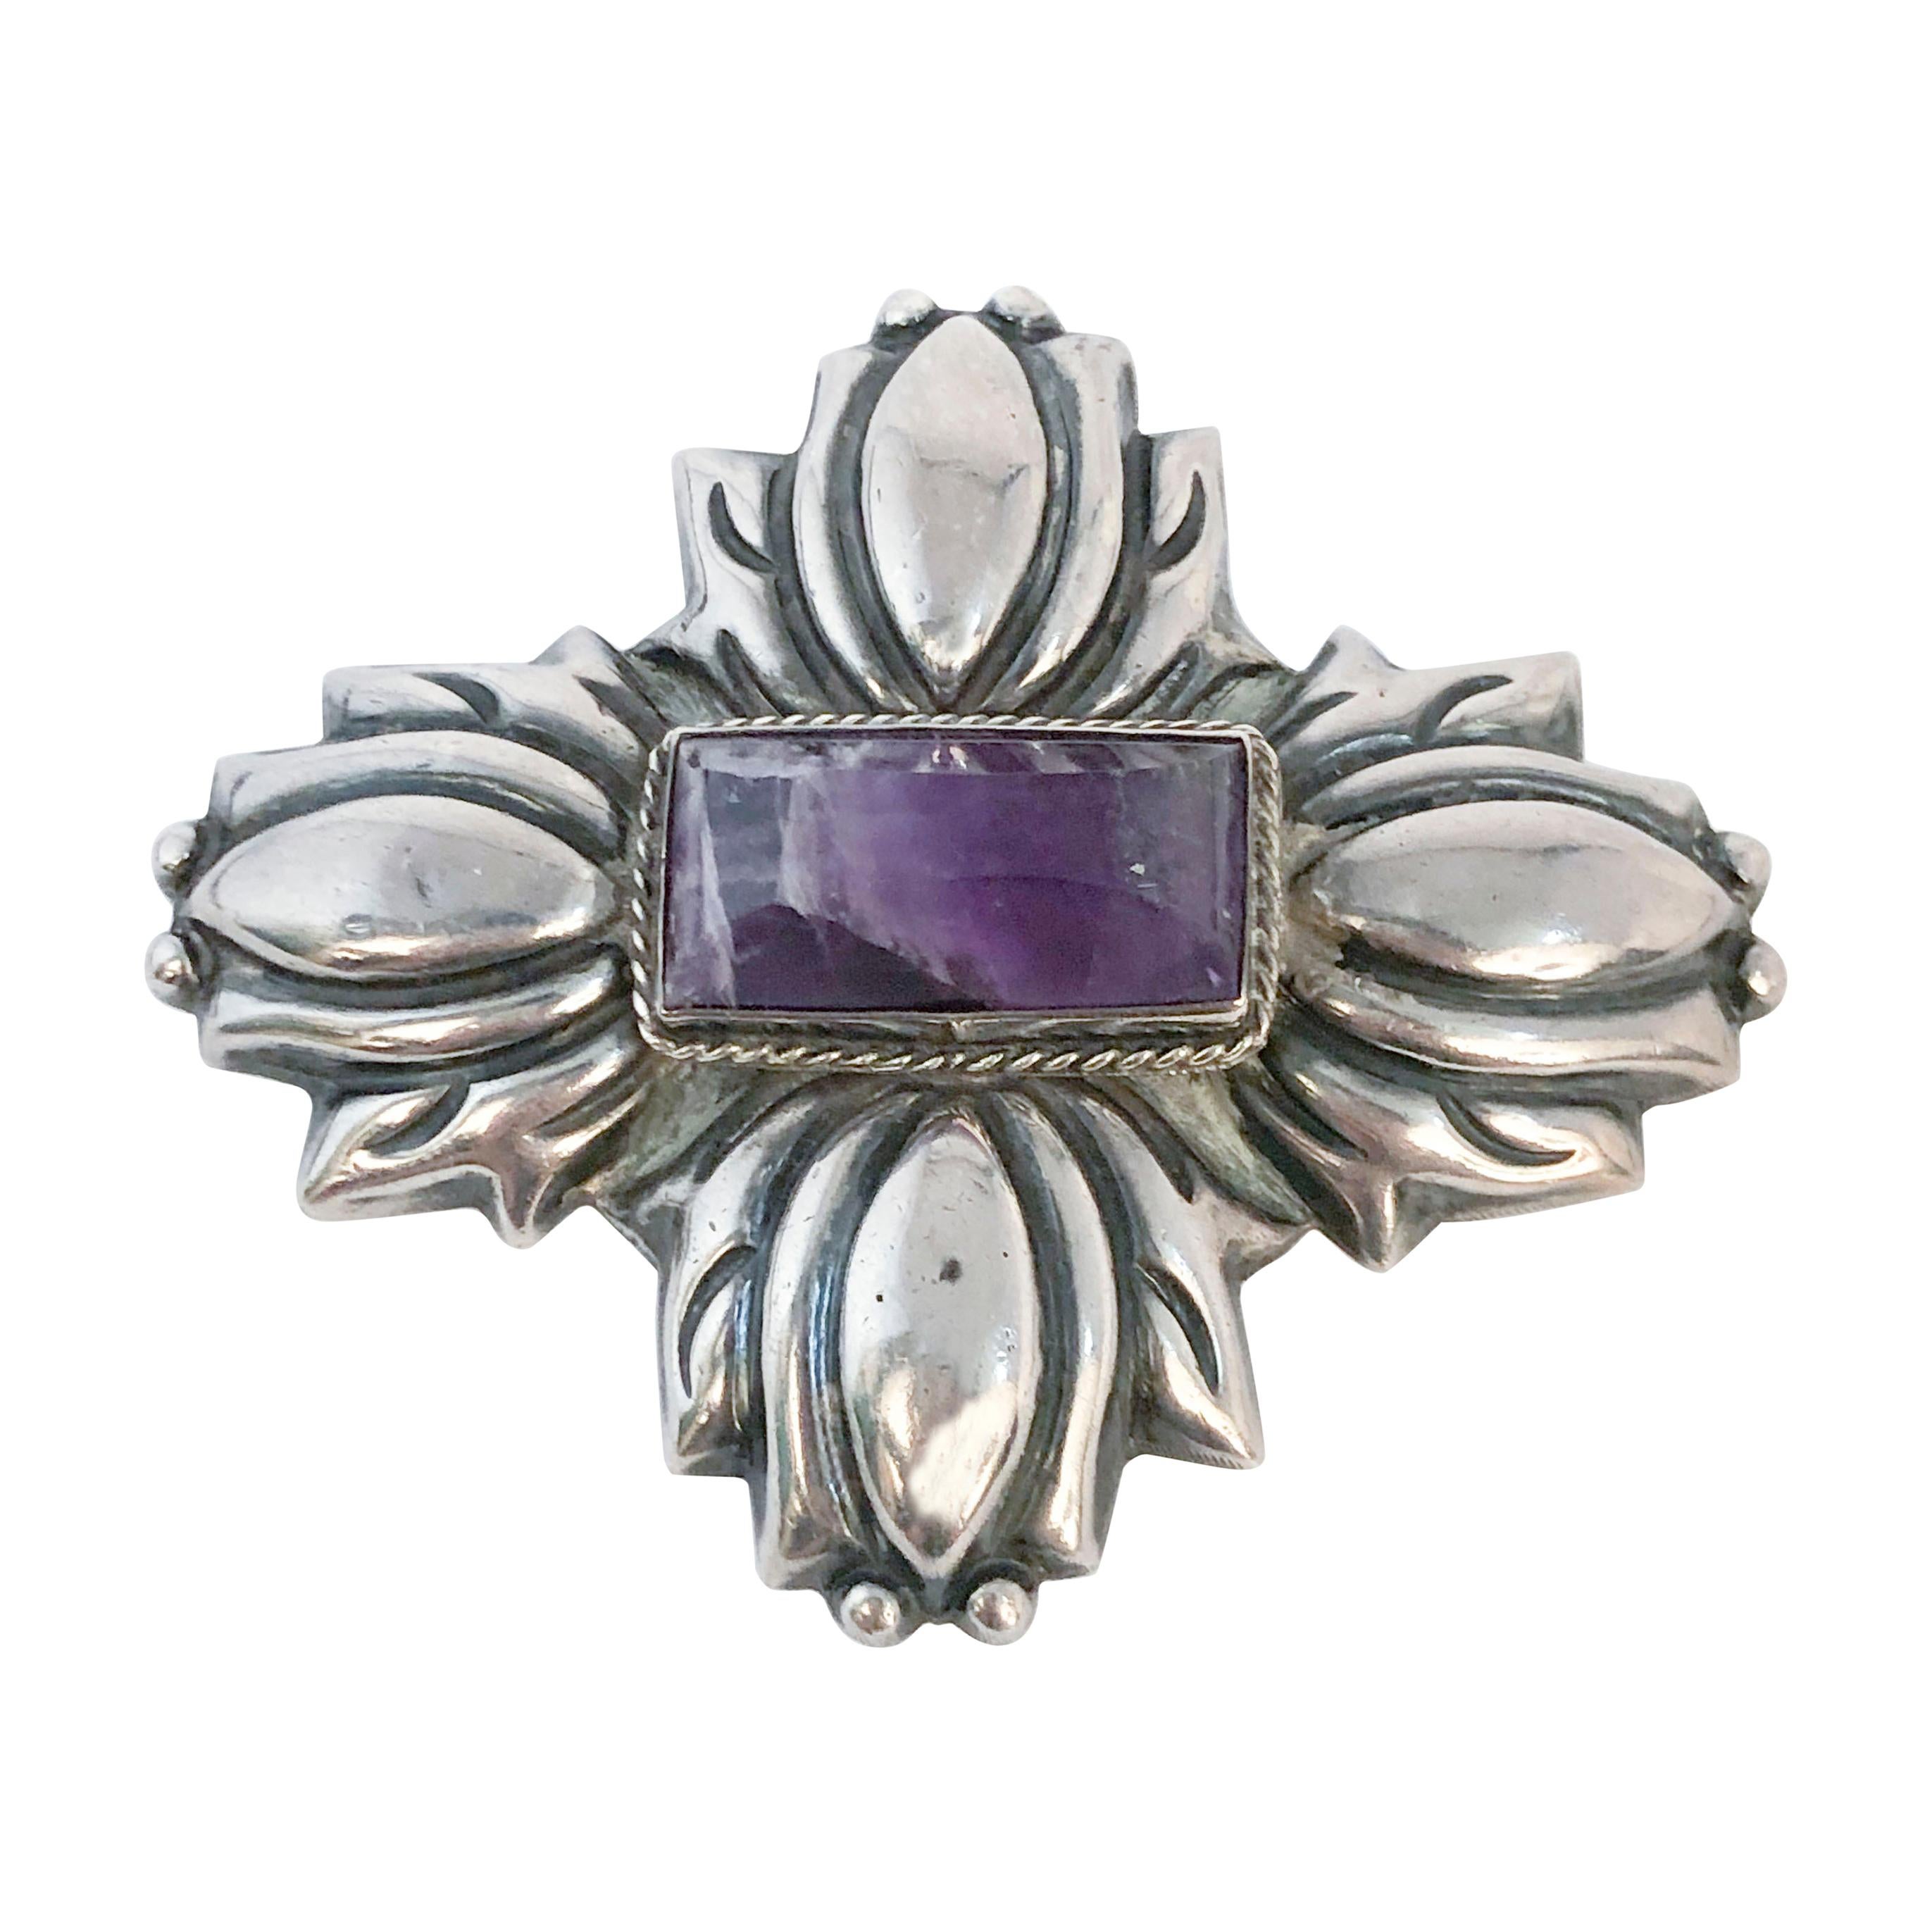 1940s Mexican Silver Brooch with Amethyst